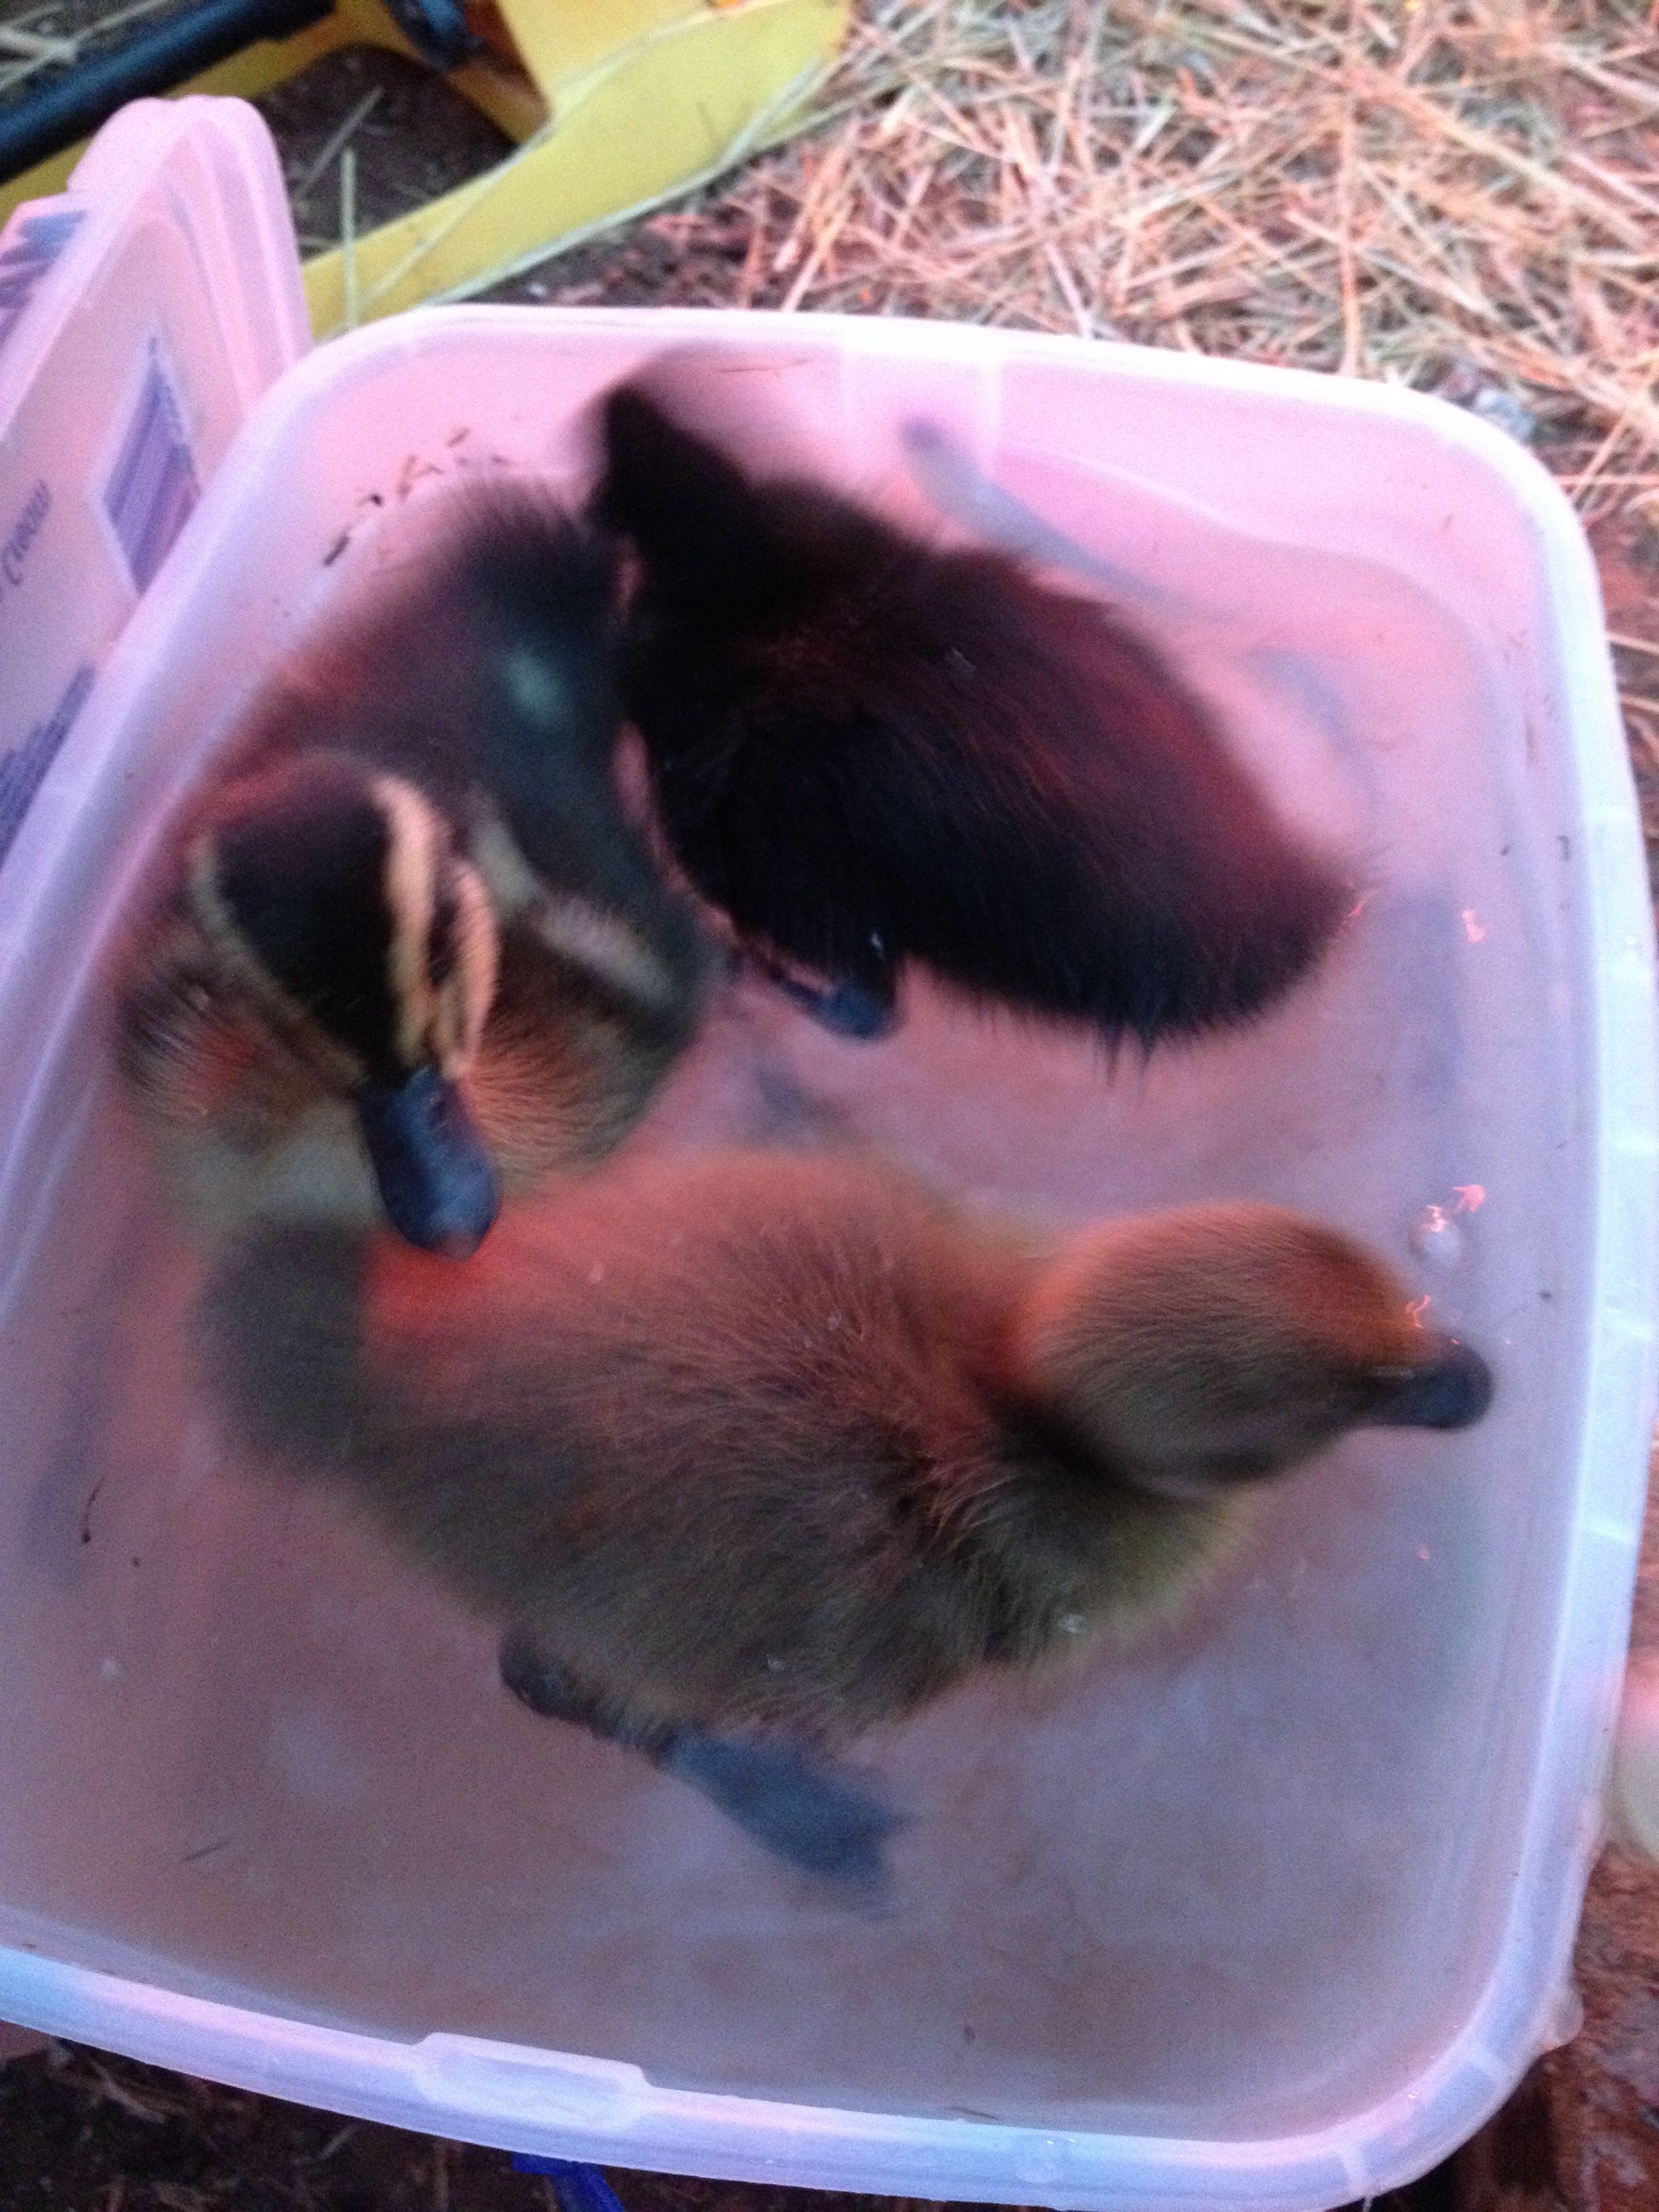 3/27/2014 On their first day they found their way up in a plastic container full of water to swim.